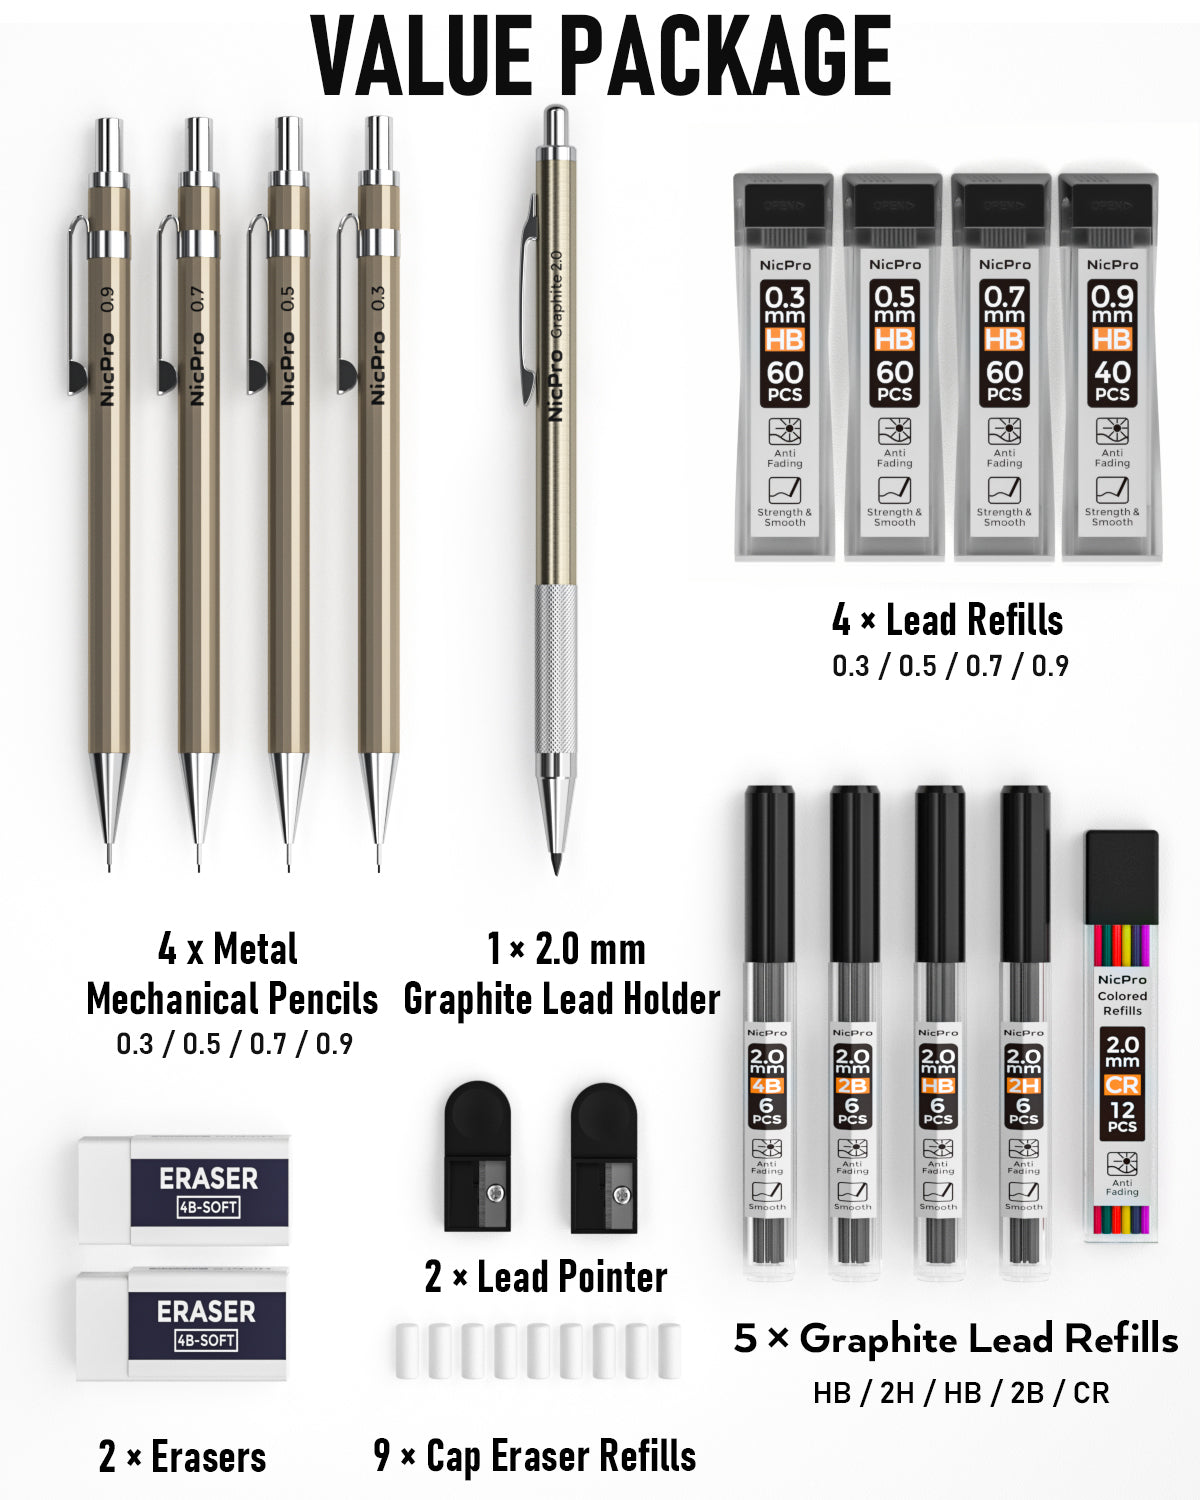 Nicpro Black Metal 2.0 Mechanical Pencil Set with Case, 3 PCS Drafting